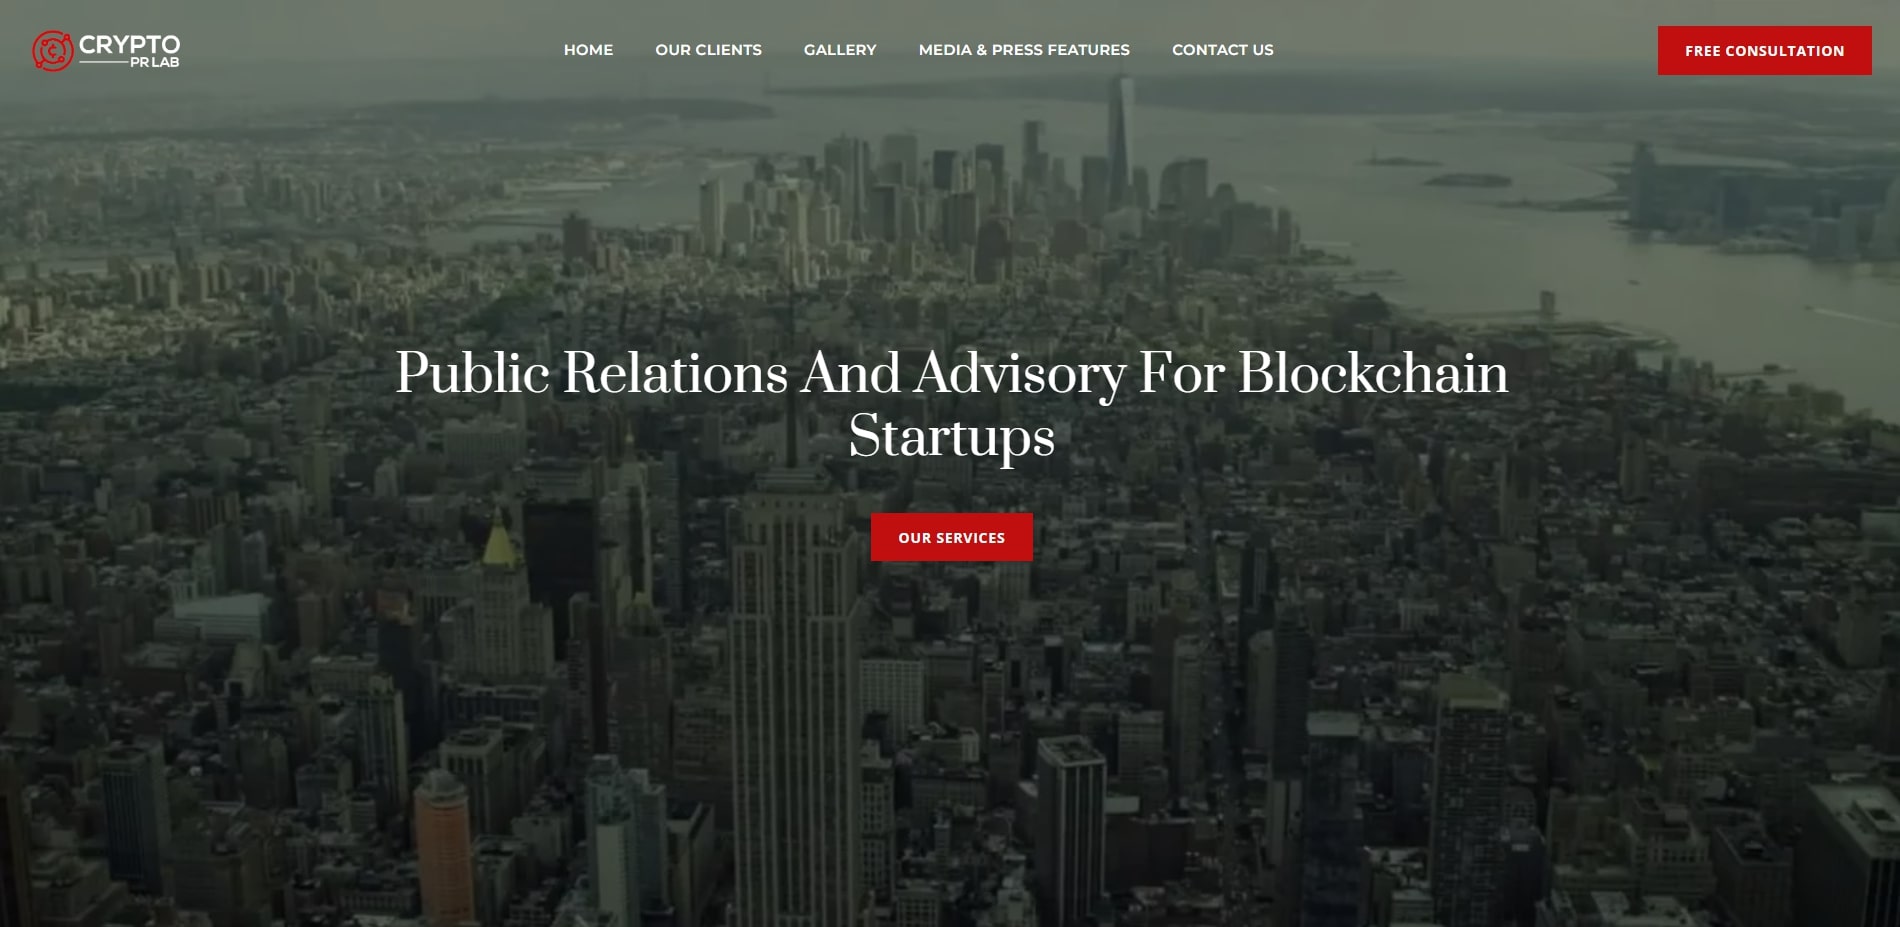 crypto PR labs is one of the leading blockchain PR companies